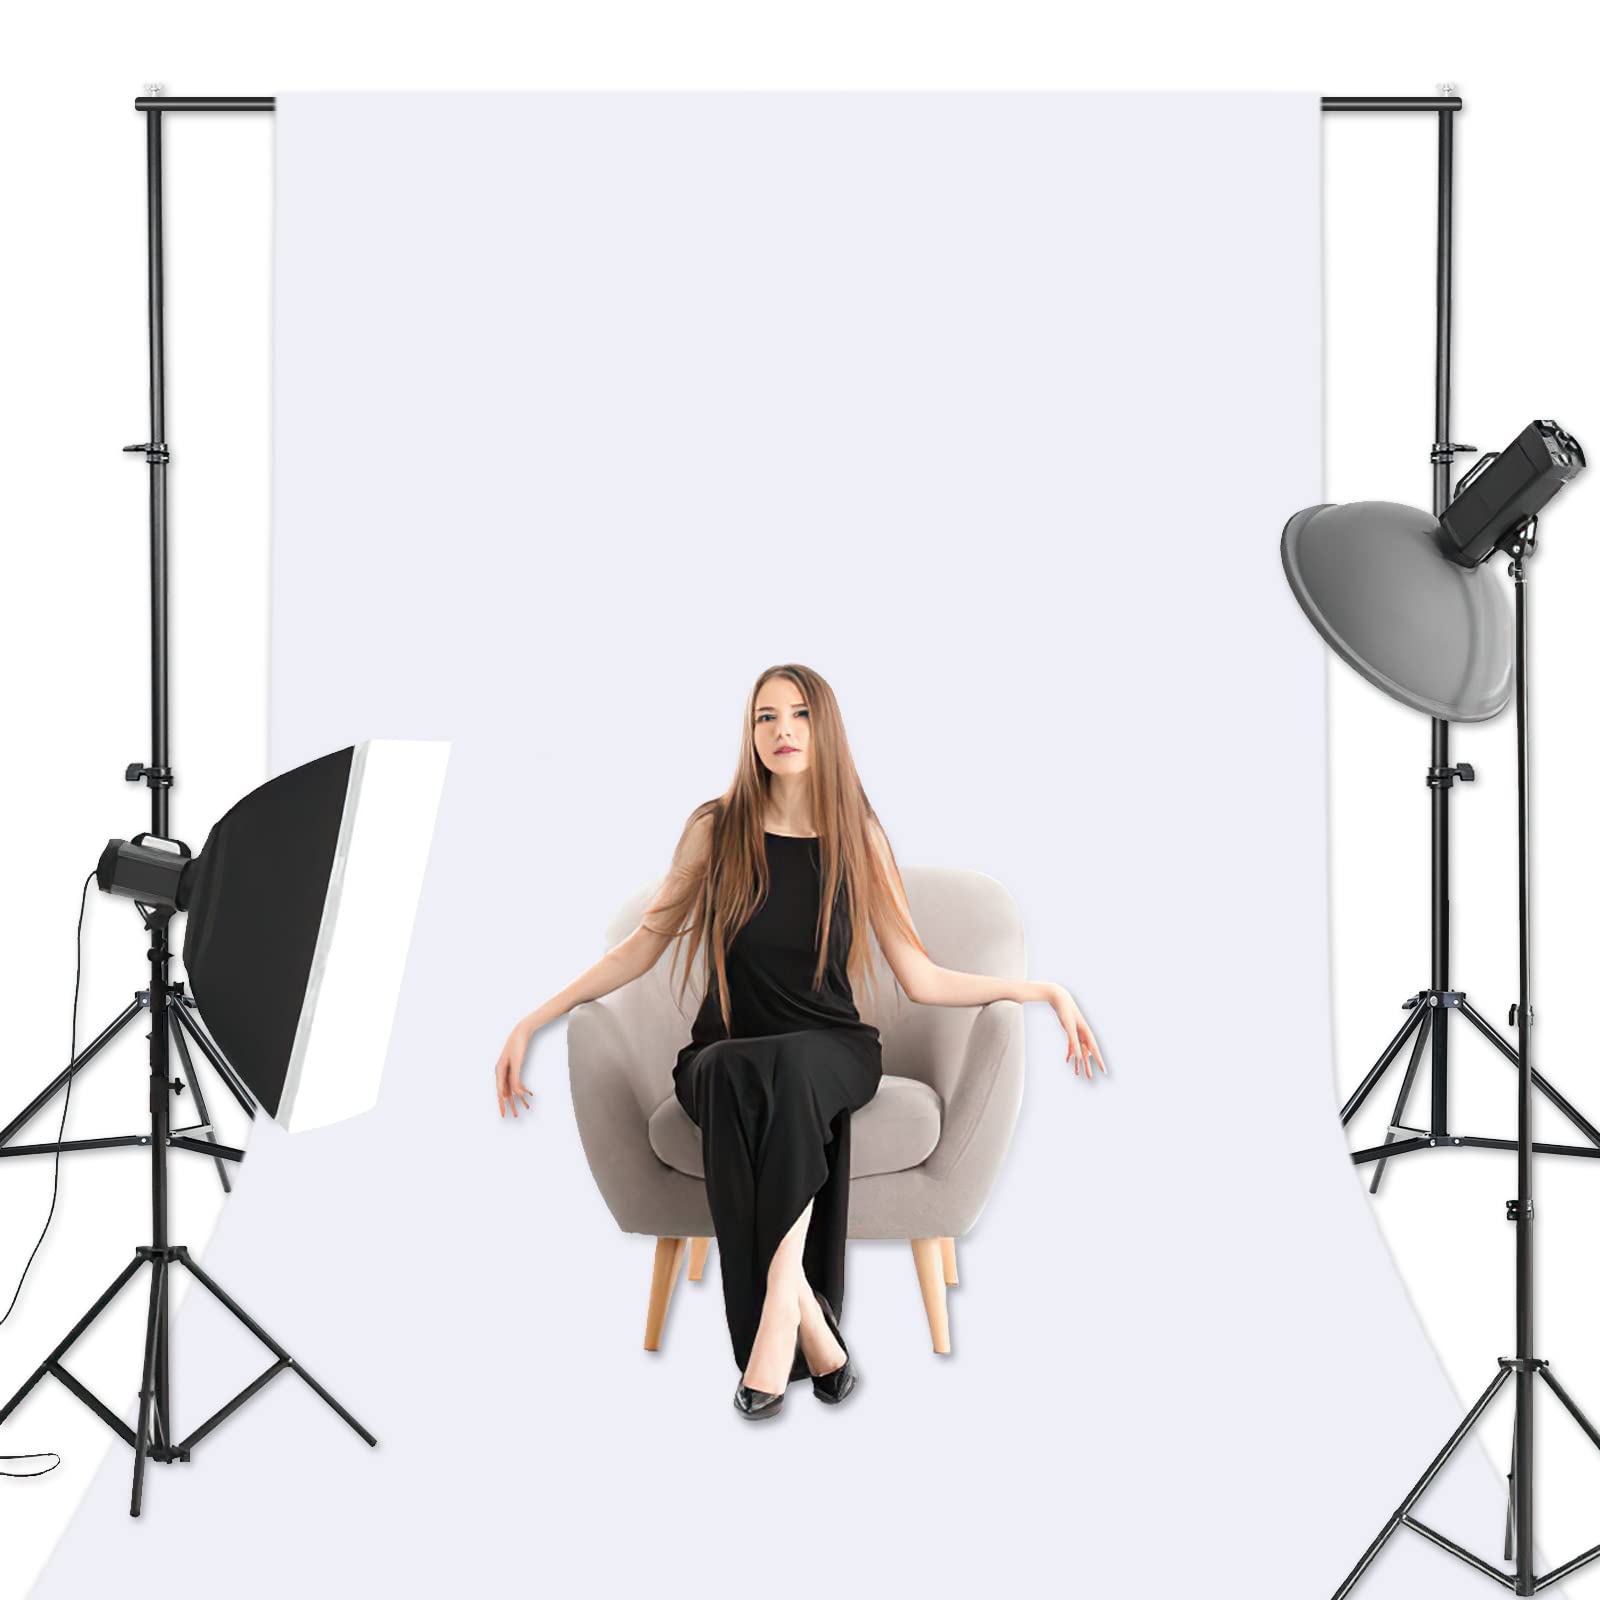 GFCC Photo Backdrop Stand Kit - 7FT x 10Ft Adjustable Background Stand for Photography Video Studio Support System with Carry Bag